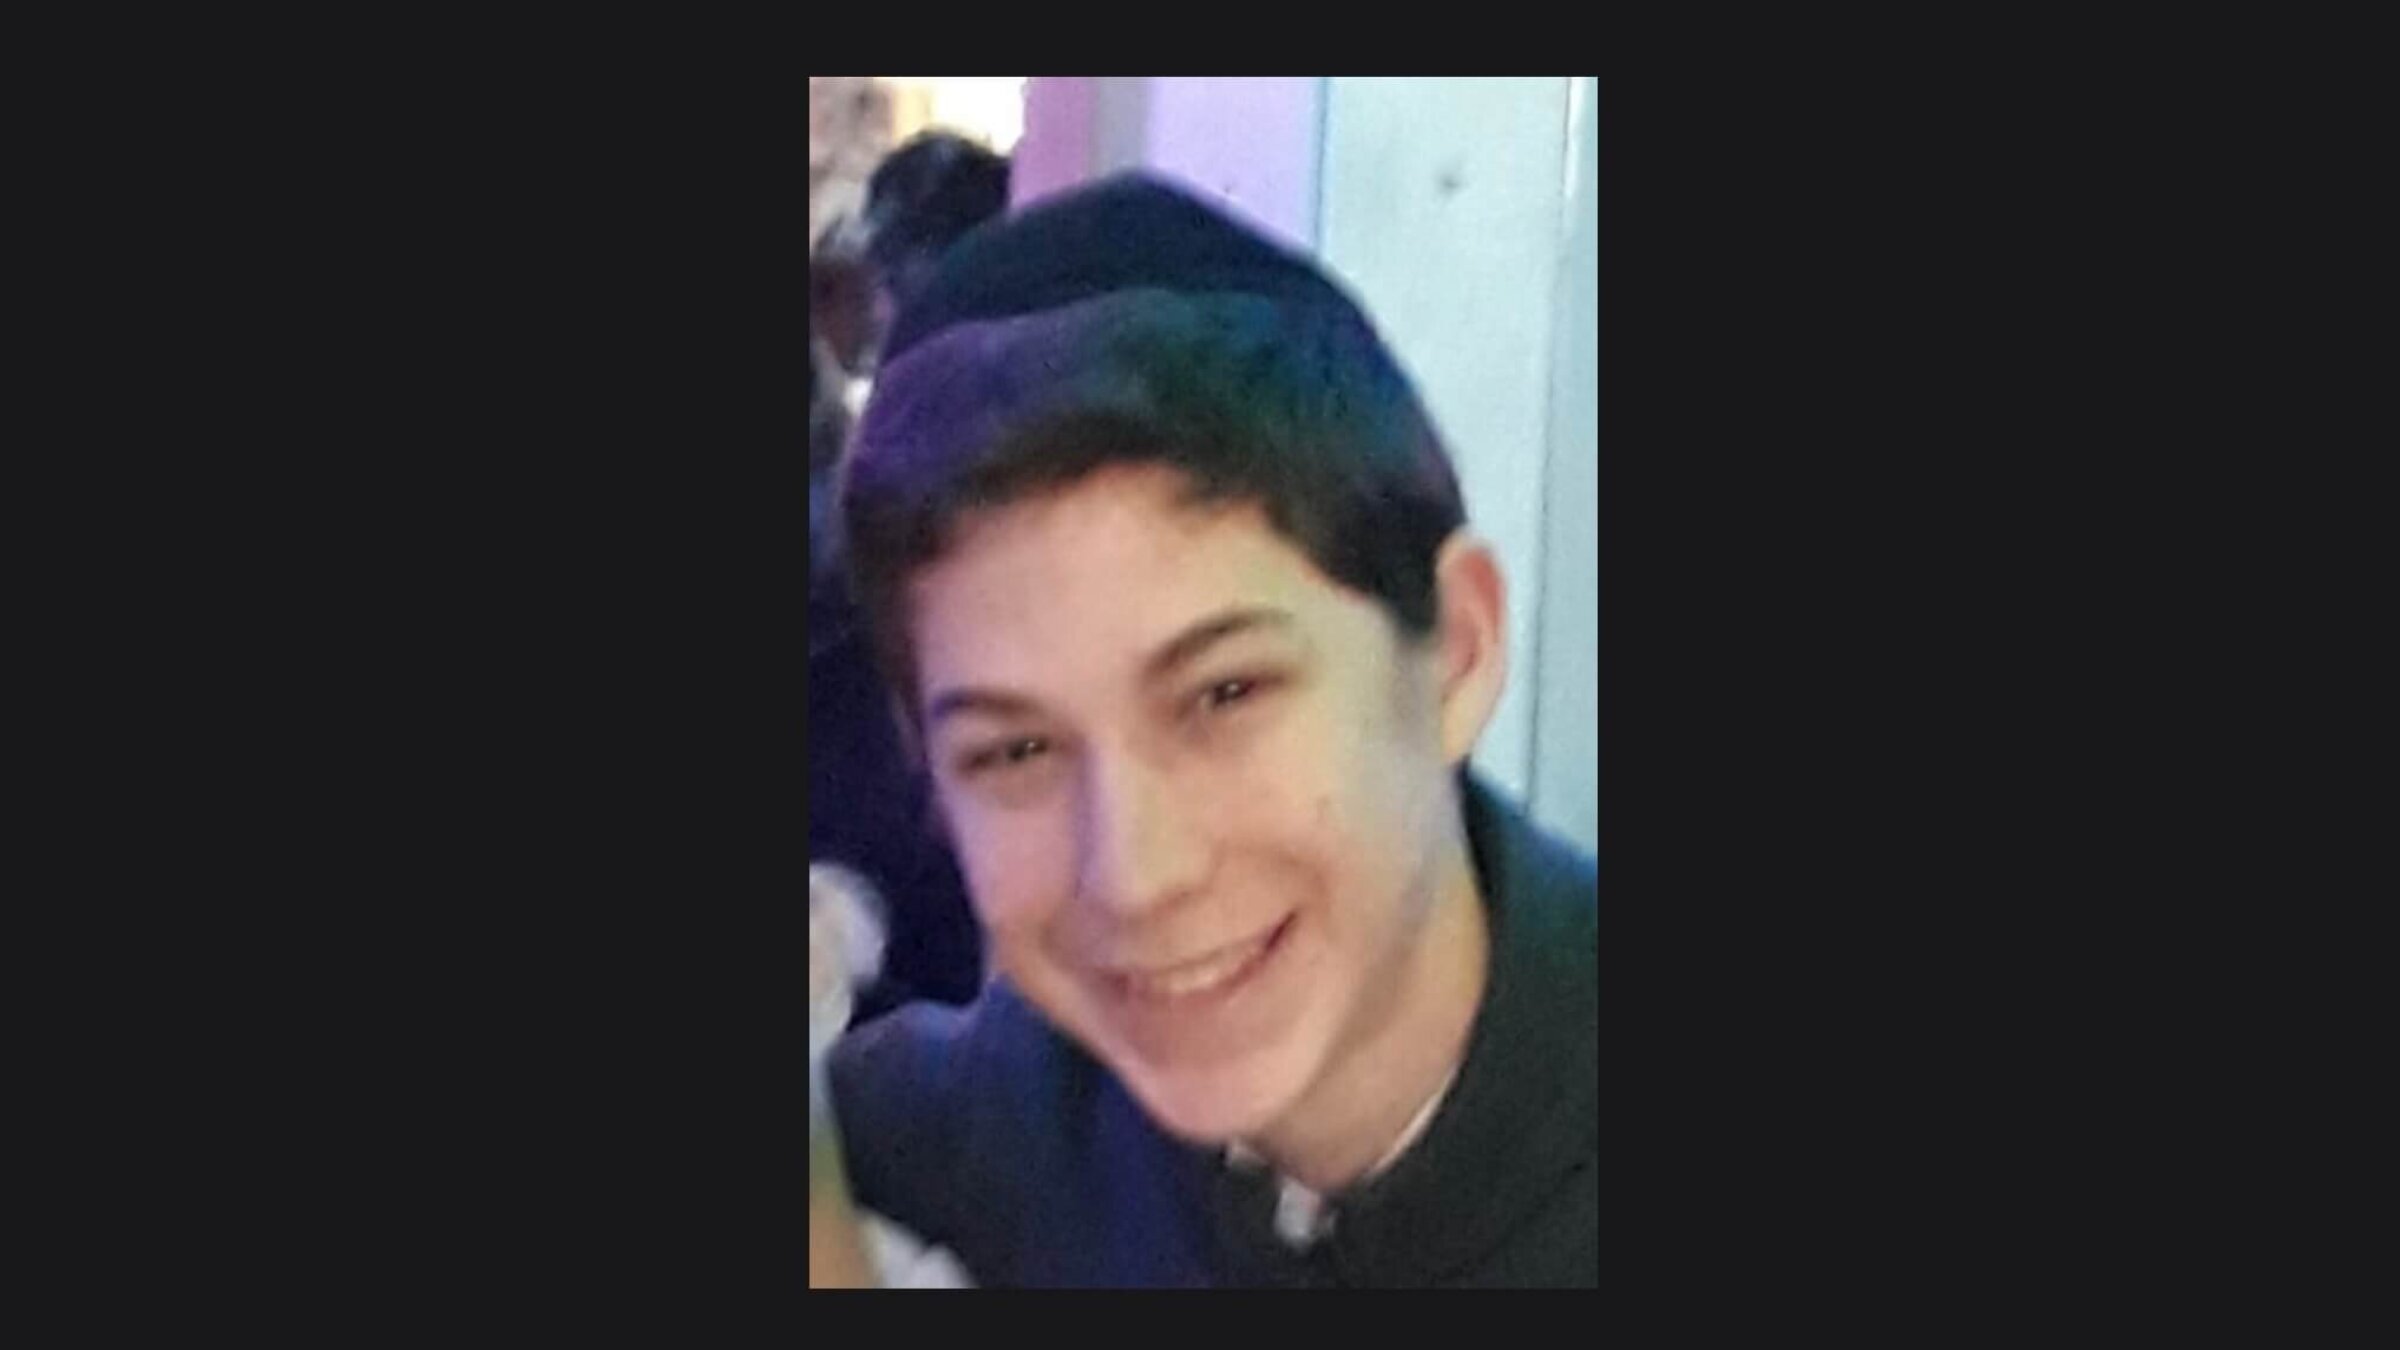 Yossi Reit, now 16, suffered brain damage during the Mt. Meron stampede on Lag B'Omer a year ago. 